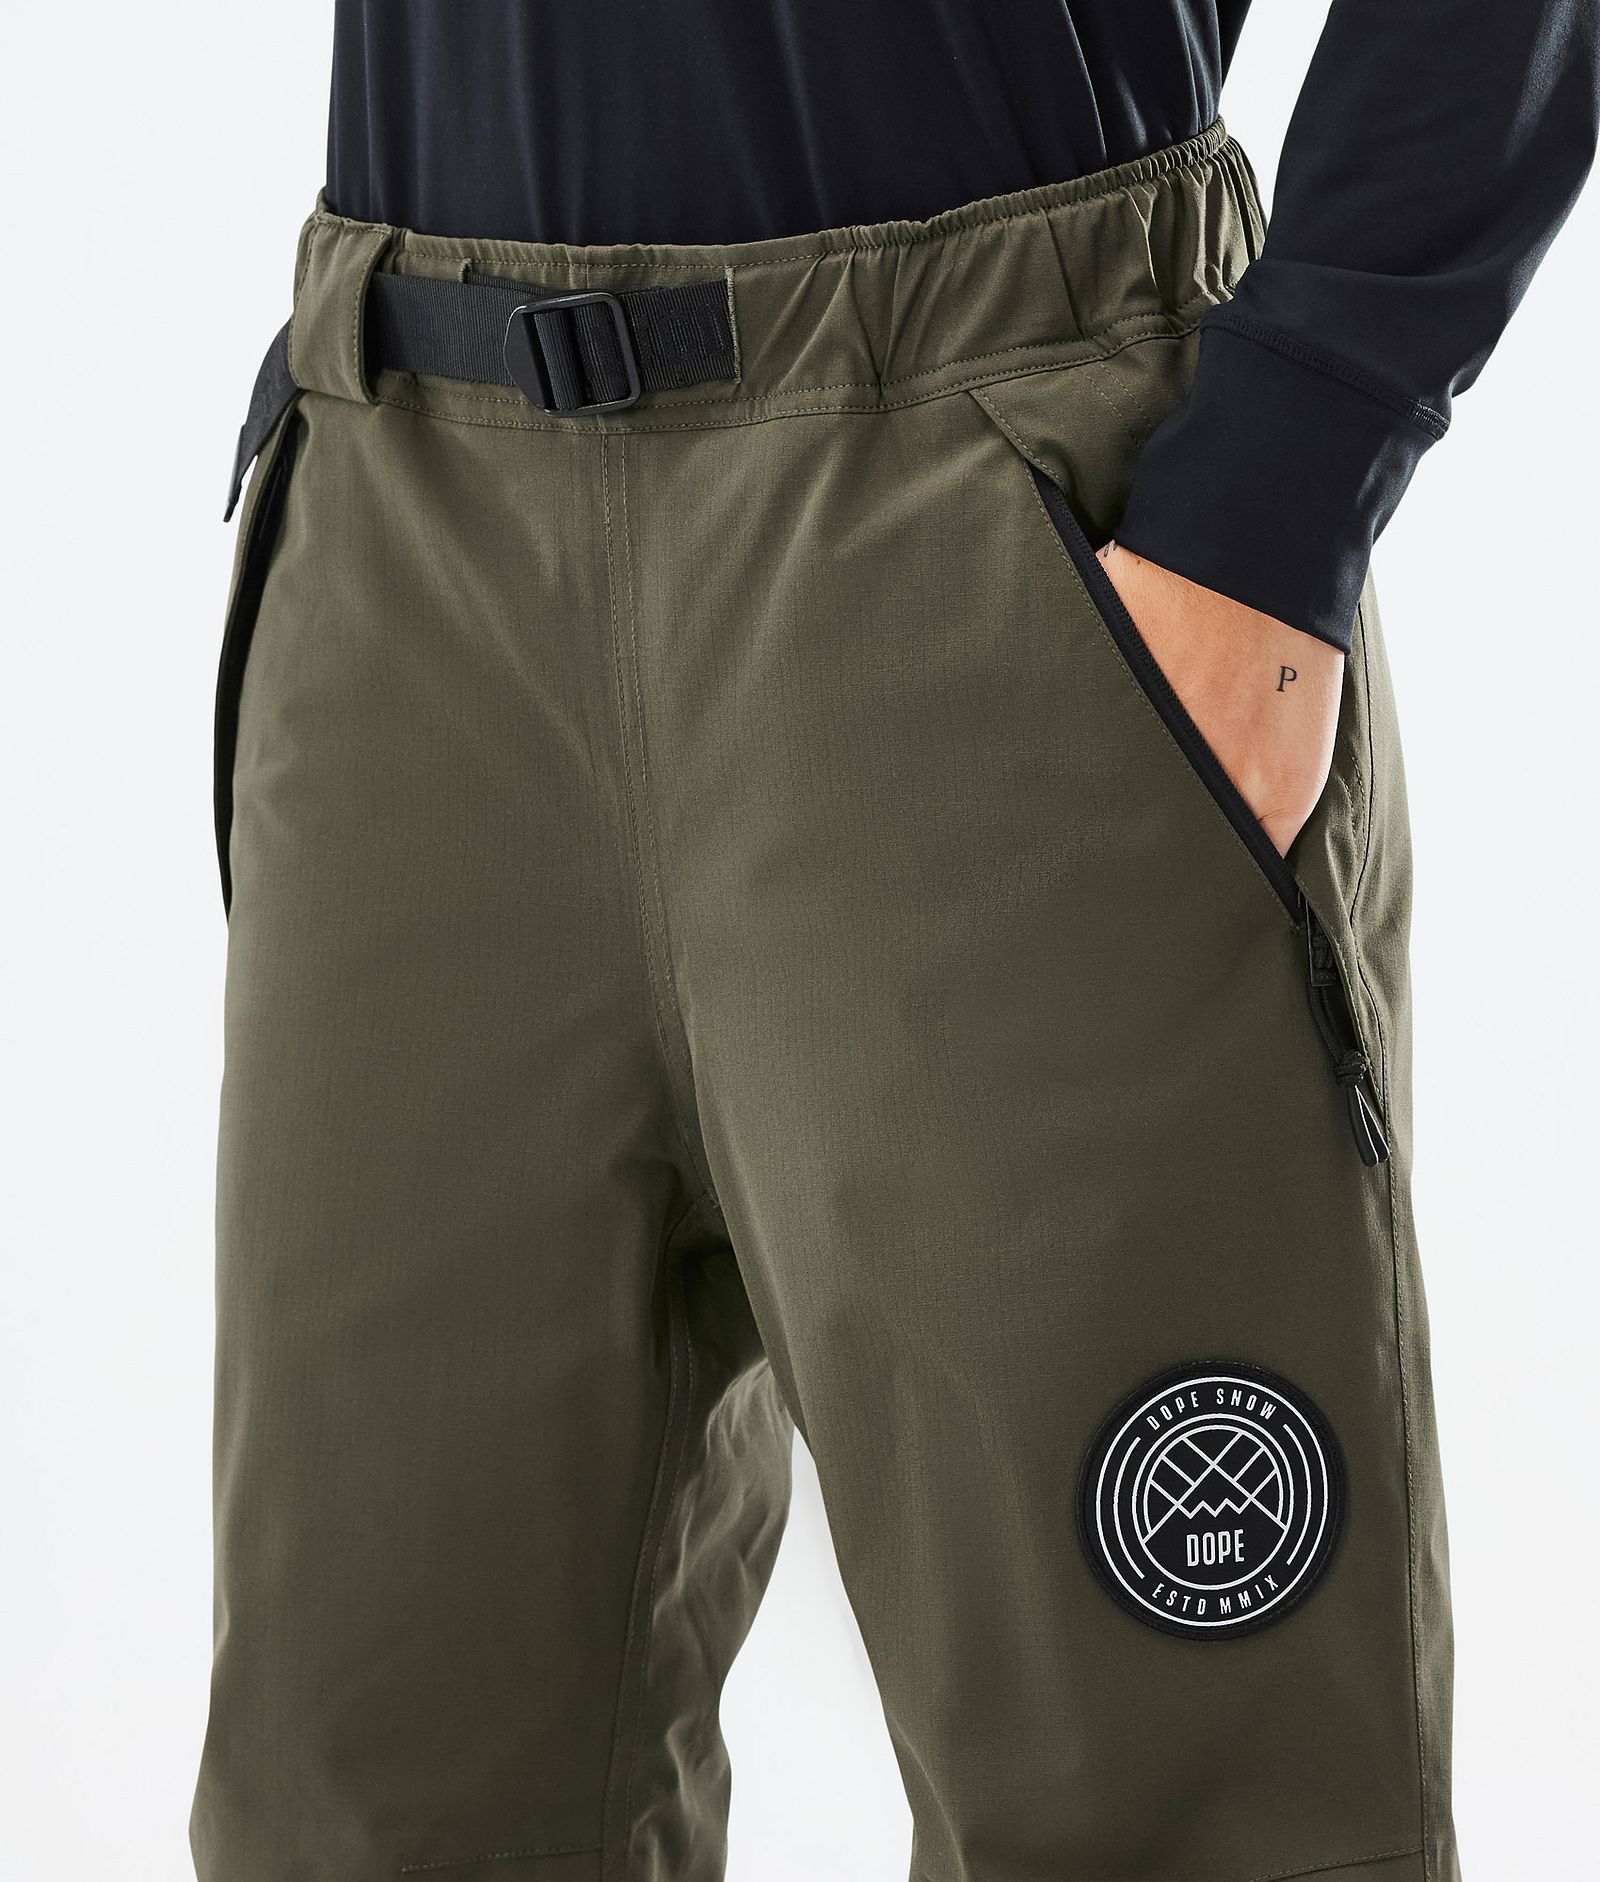 Dope Blizzard W 2022 Pantalones Esquí Mujer Olive Green